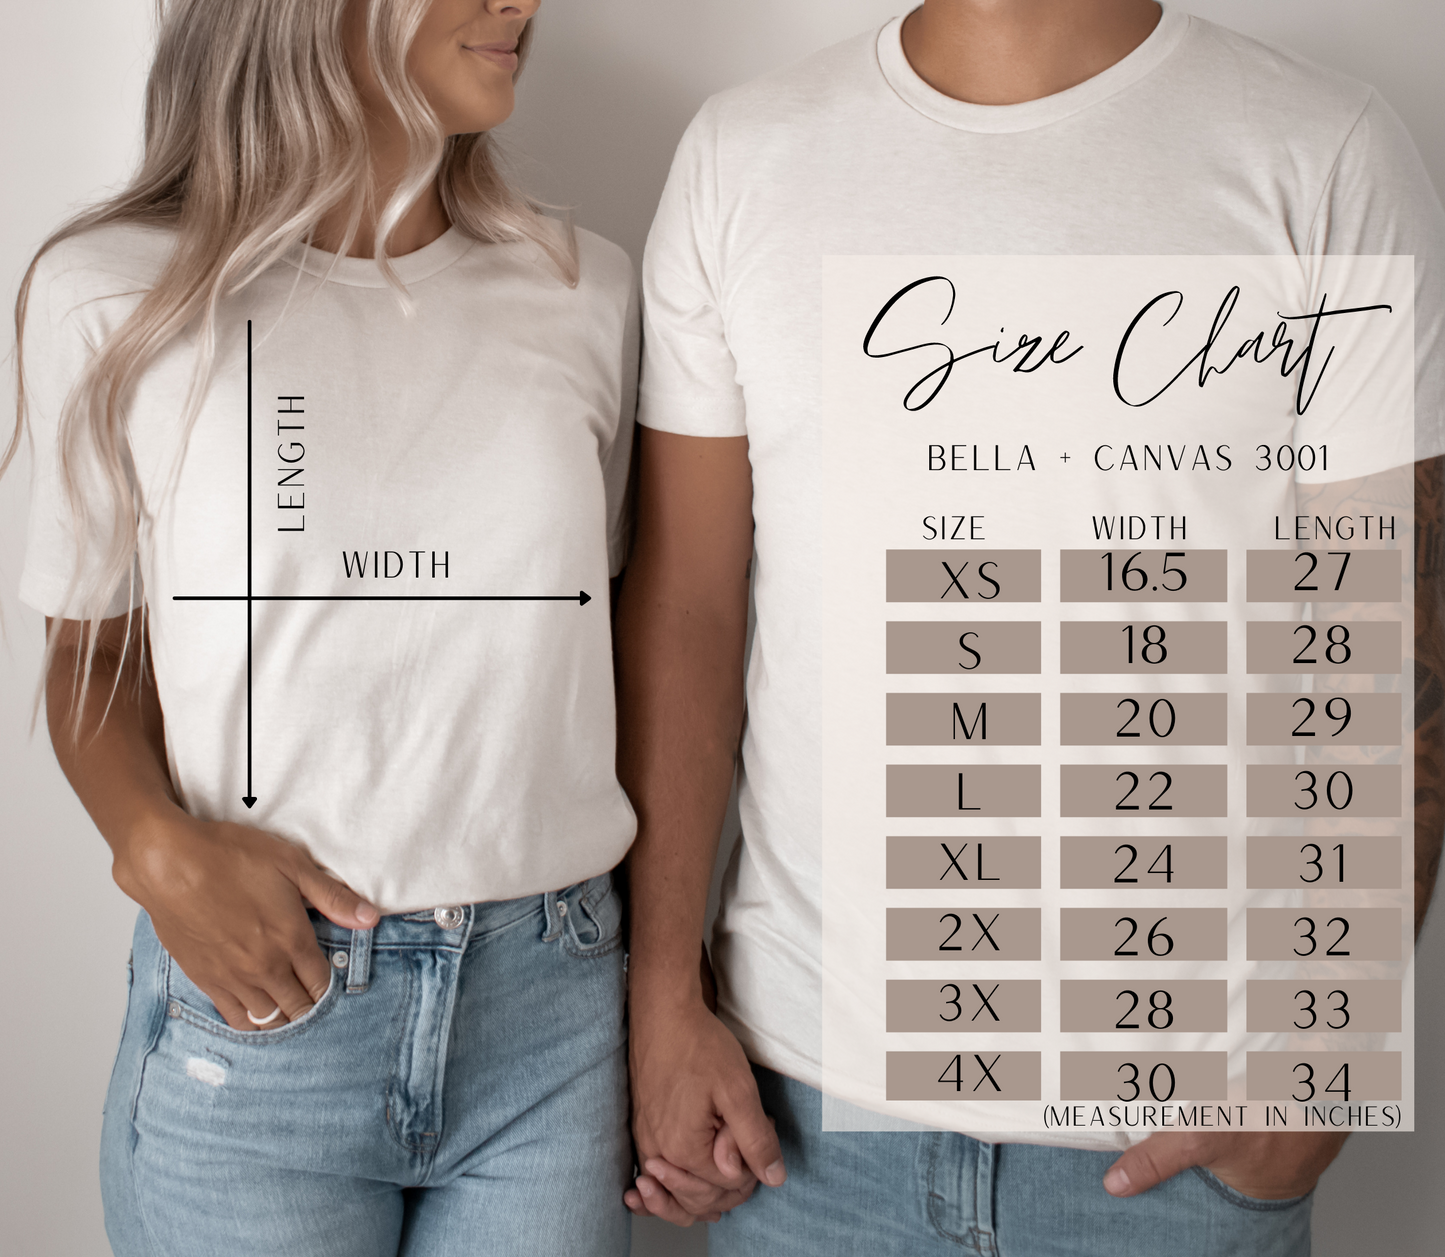 One + Two = Four | Twin Pregnancy Announcement Shirts